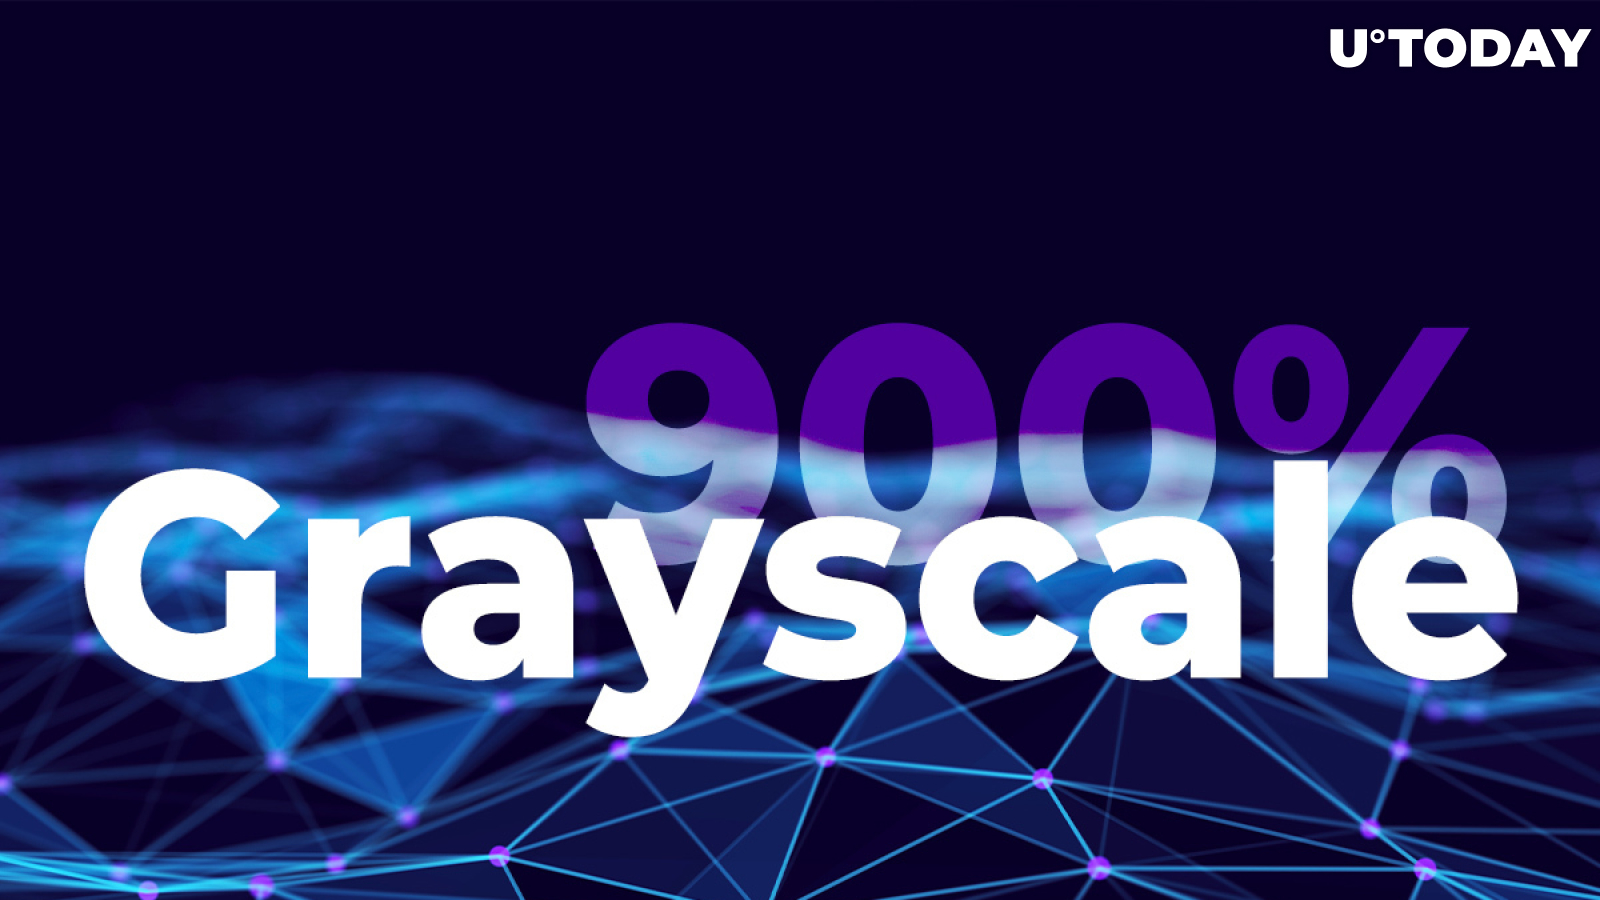 Grayscale Crypto Ownership Sees 900% Surge